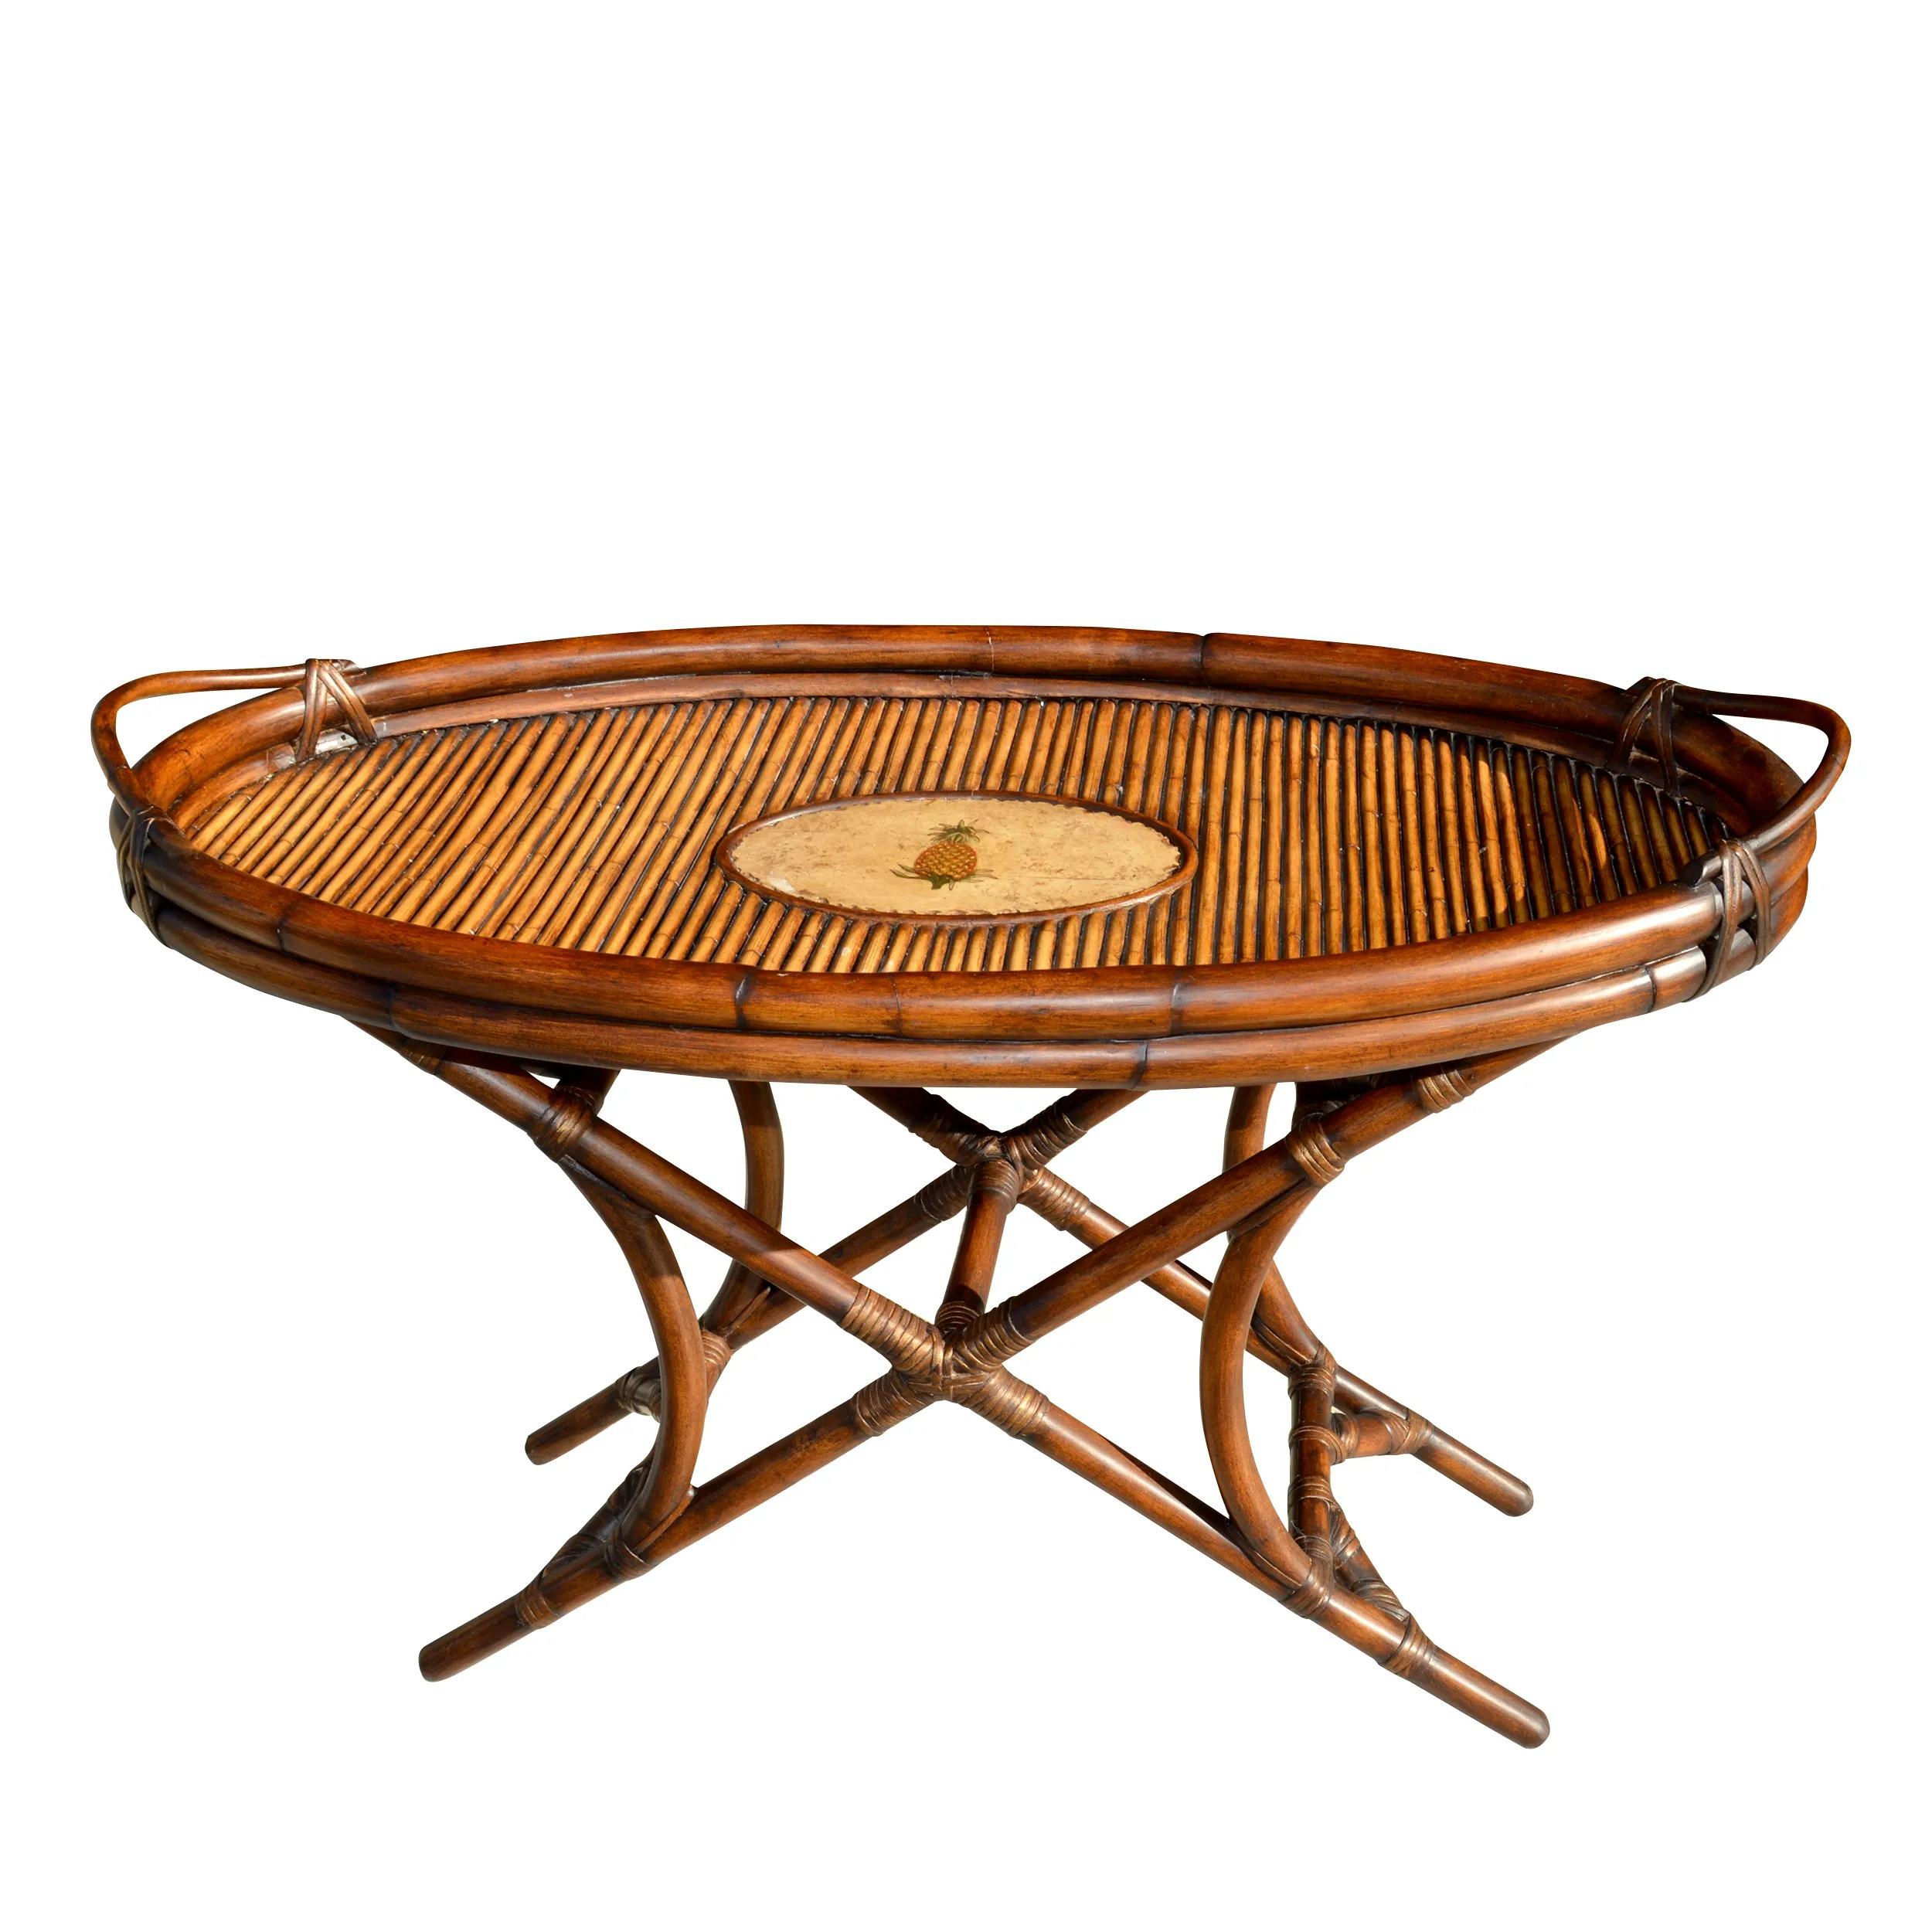 38.5? British Colonial style cane and bamboo tray table

Charming and perfect for serving cocktails or breakfast in bed, this vintage rattan butler tray features two cut-out handles for easy transport. The tray top is embellished with a pineapple.